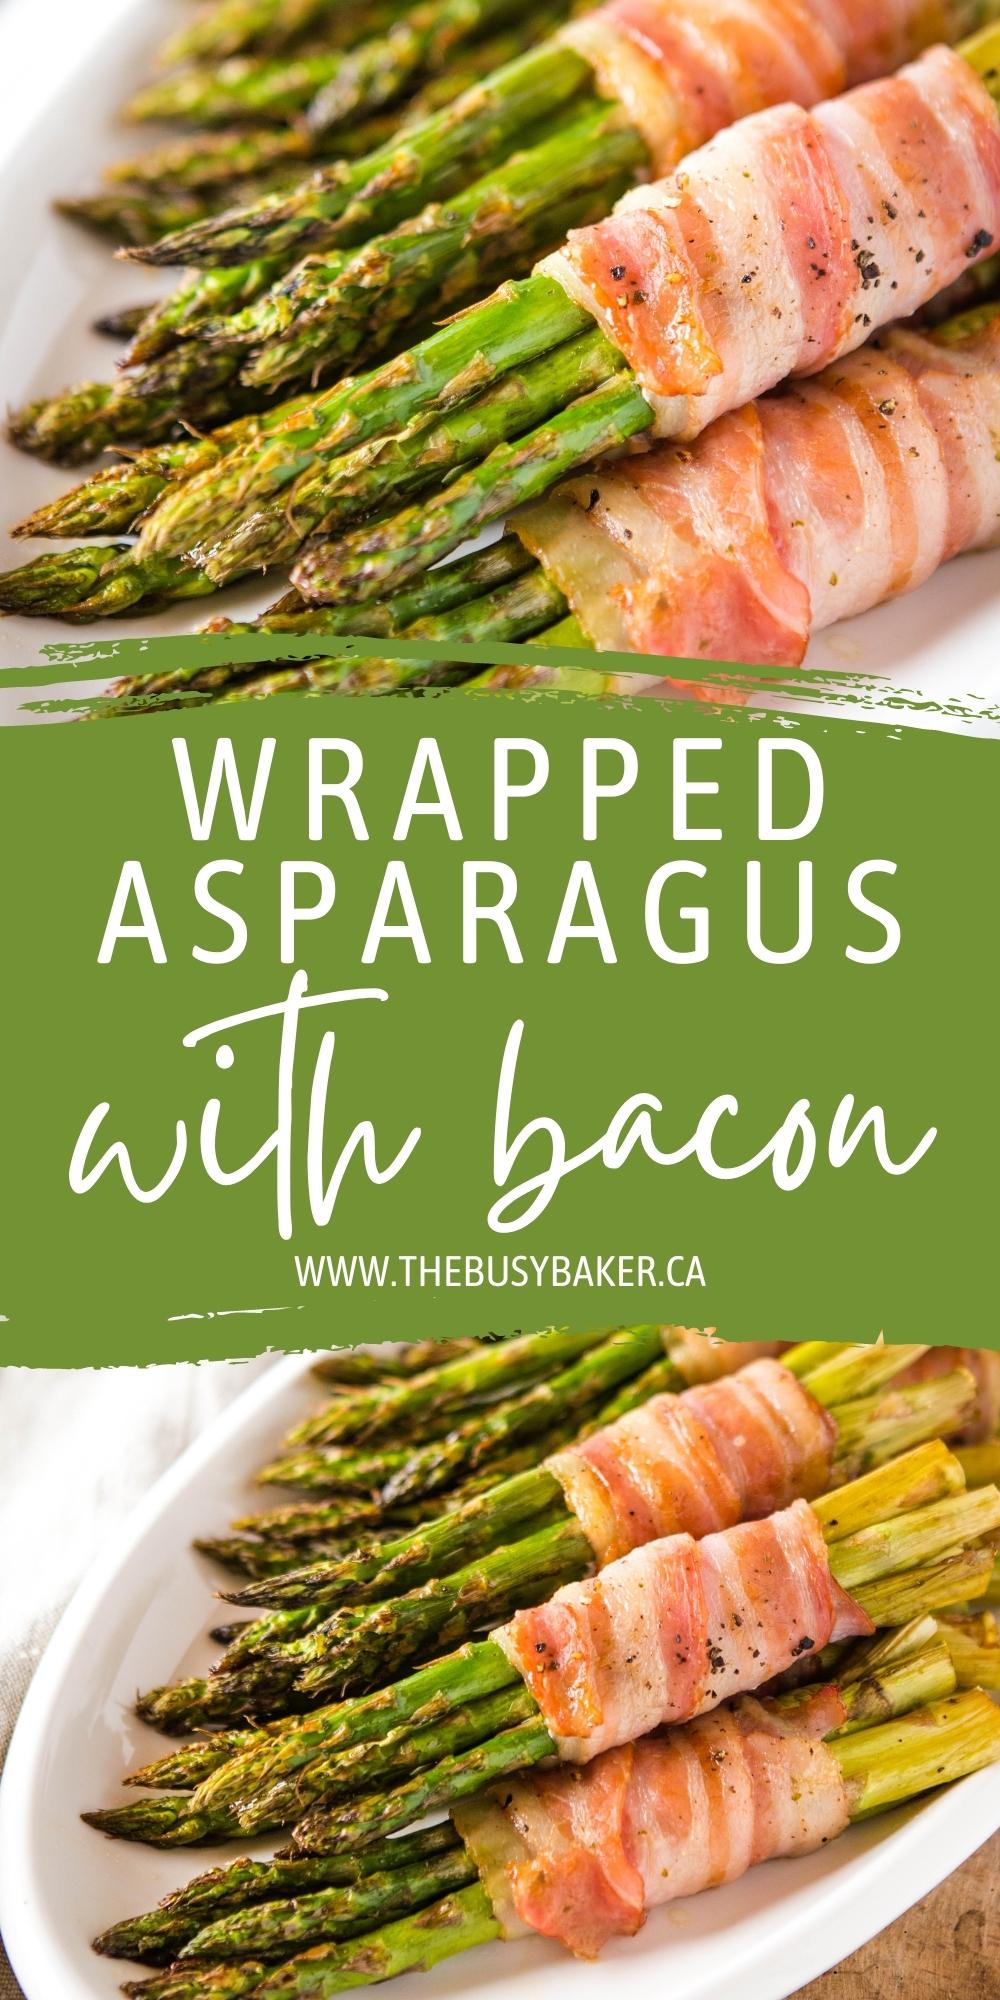 Wrapped Asparagus with Bacon Pinterest Recipe